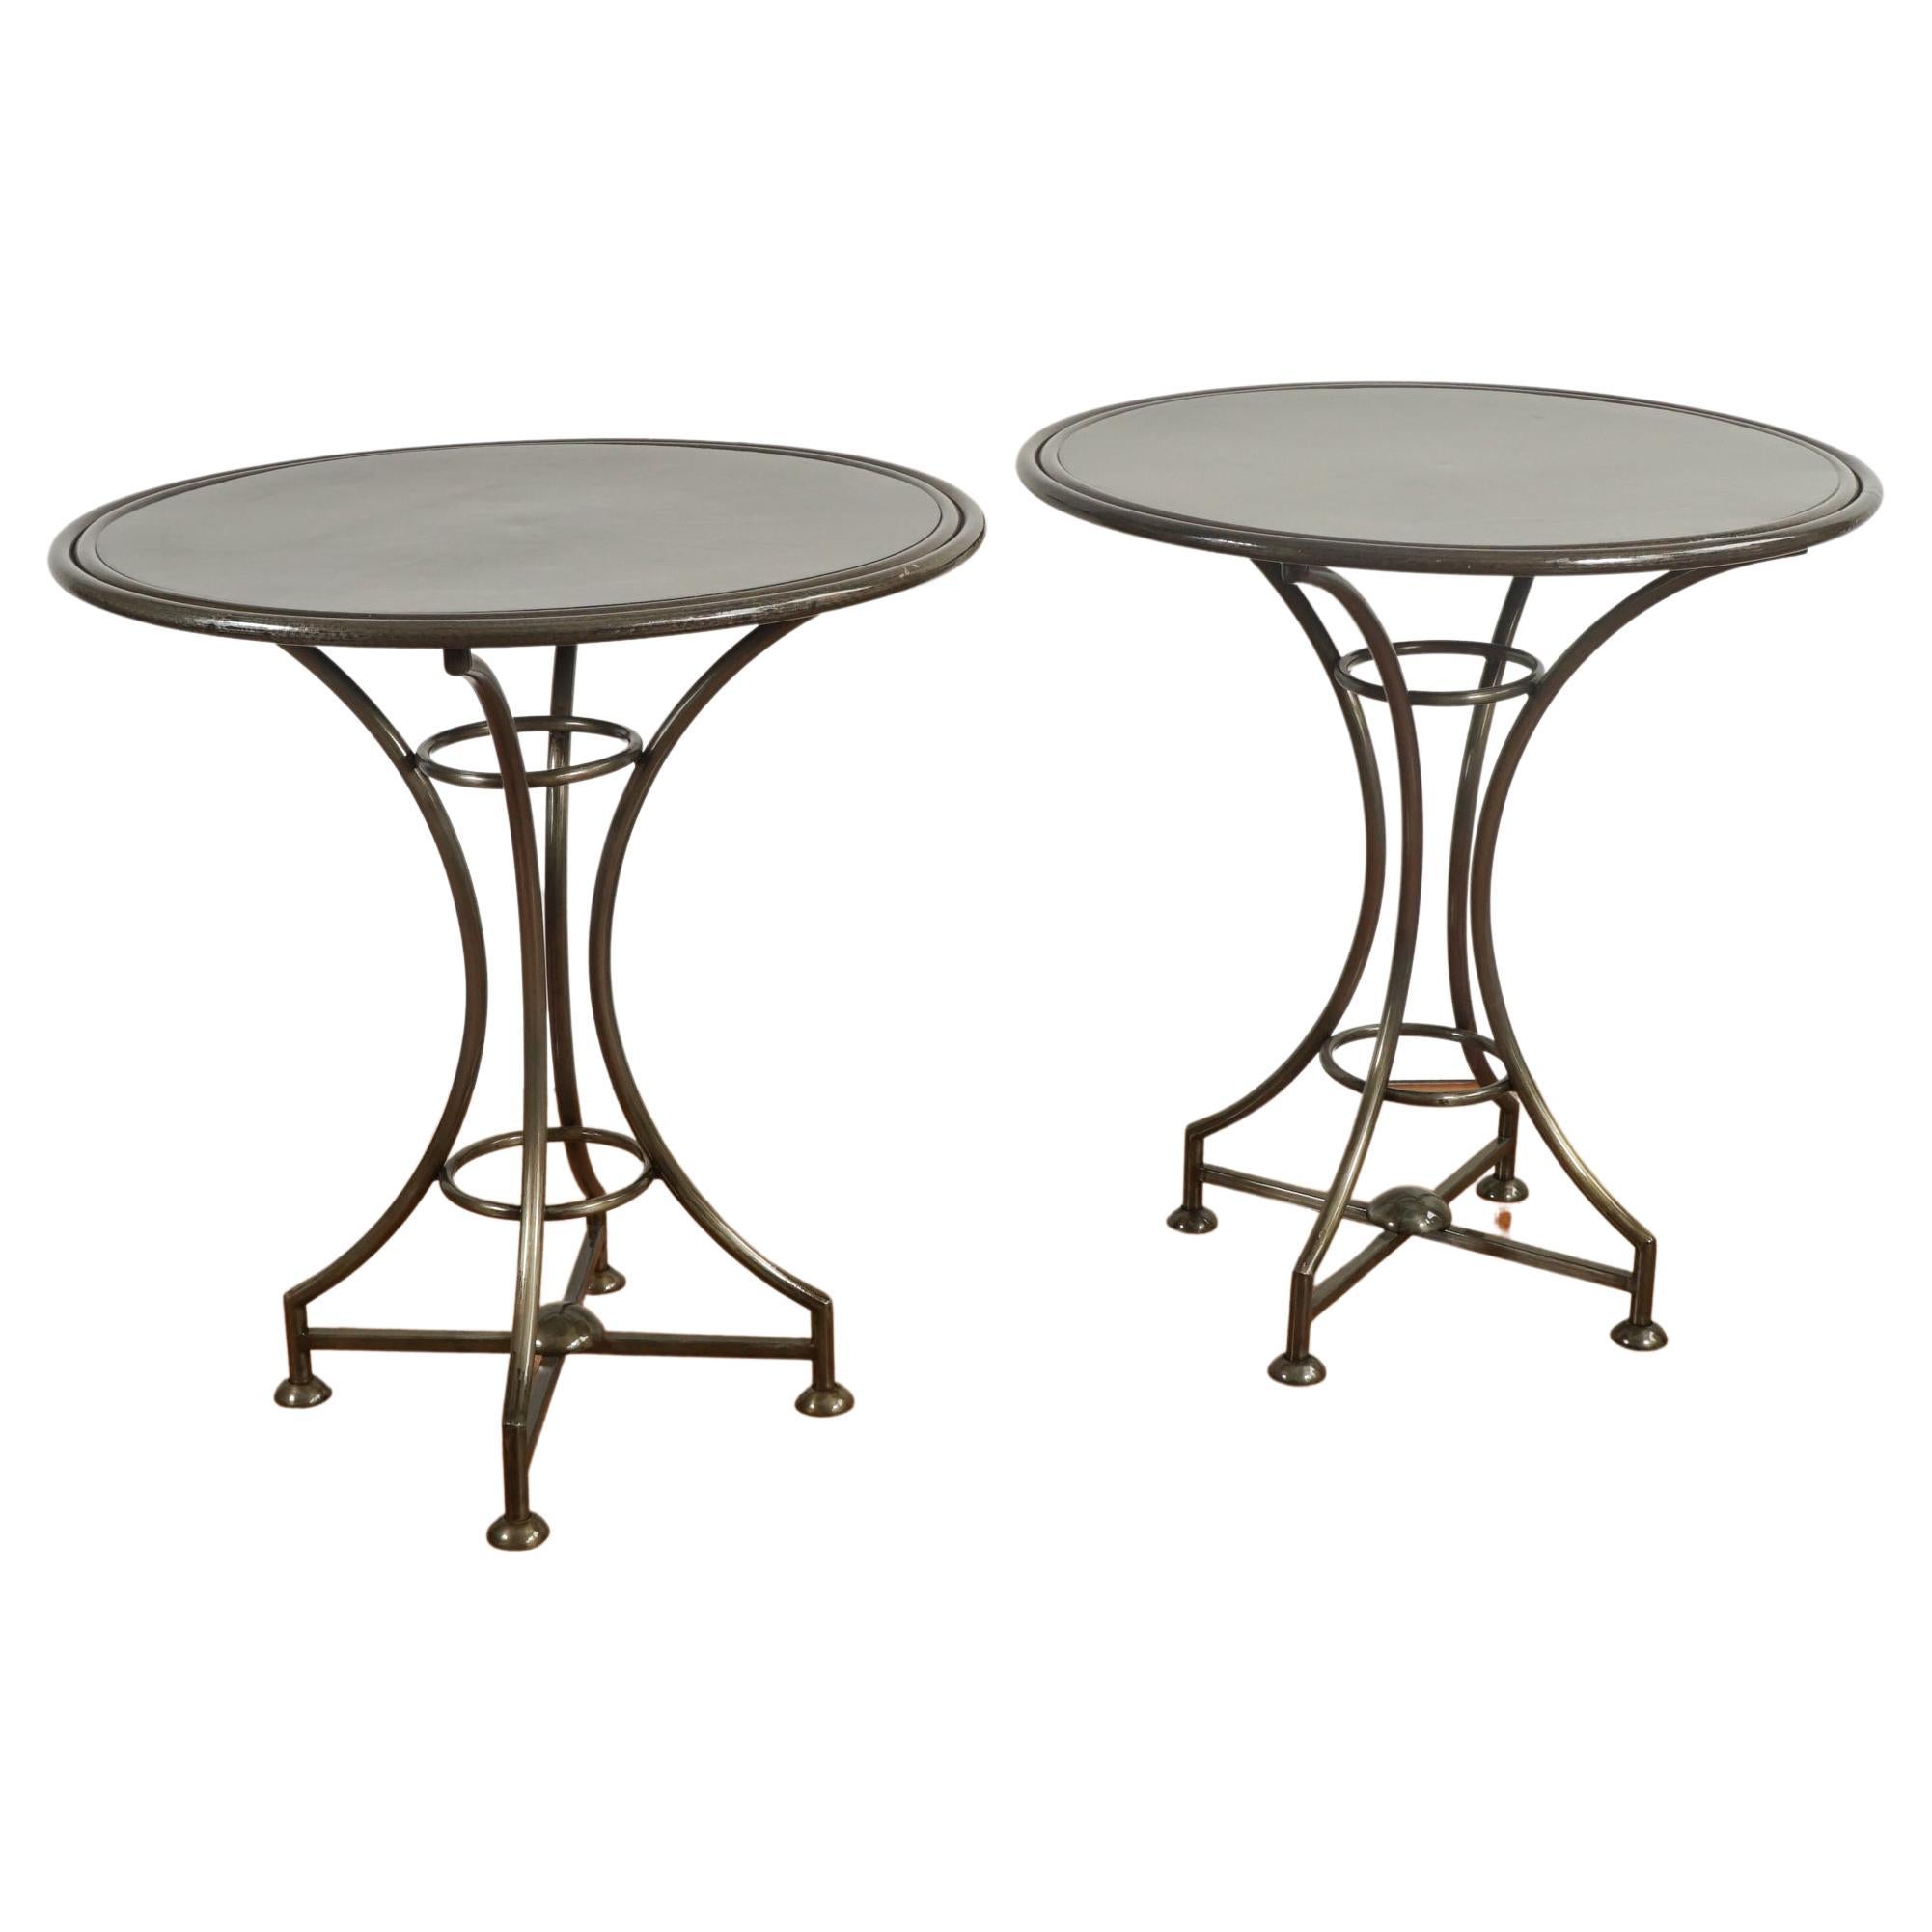 Pair of Round Faux Iron Accent Tables